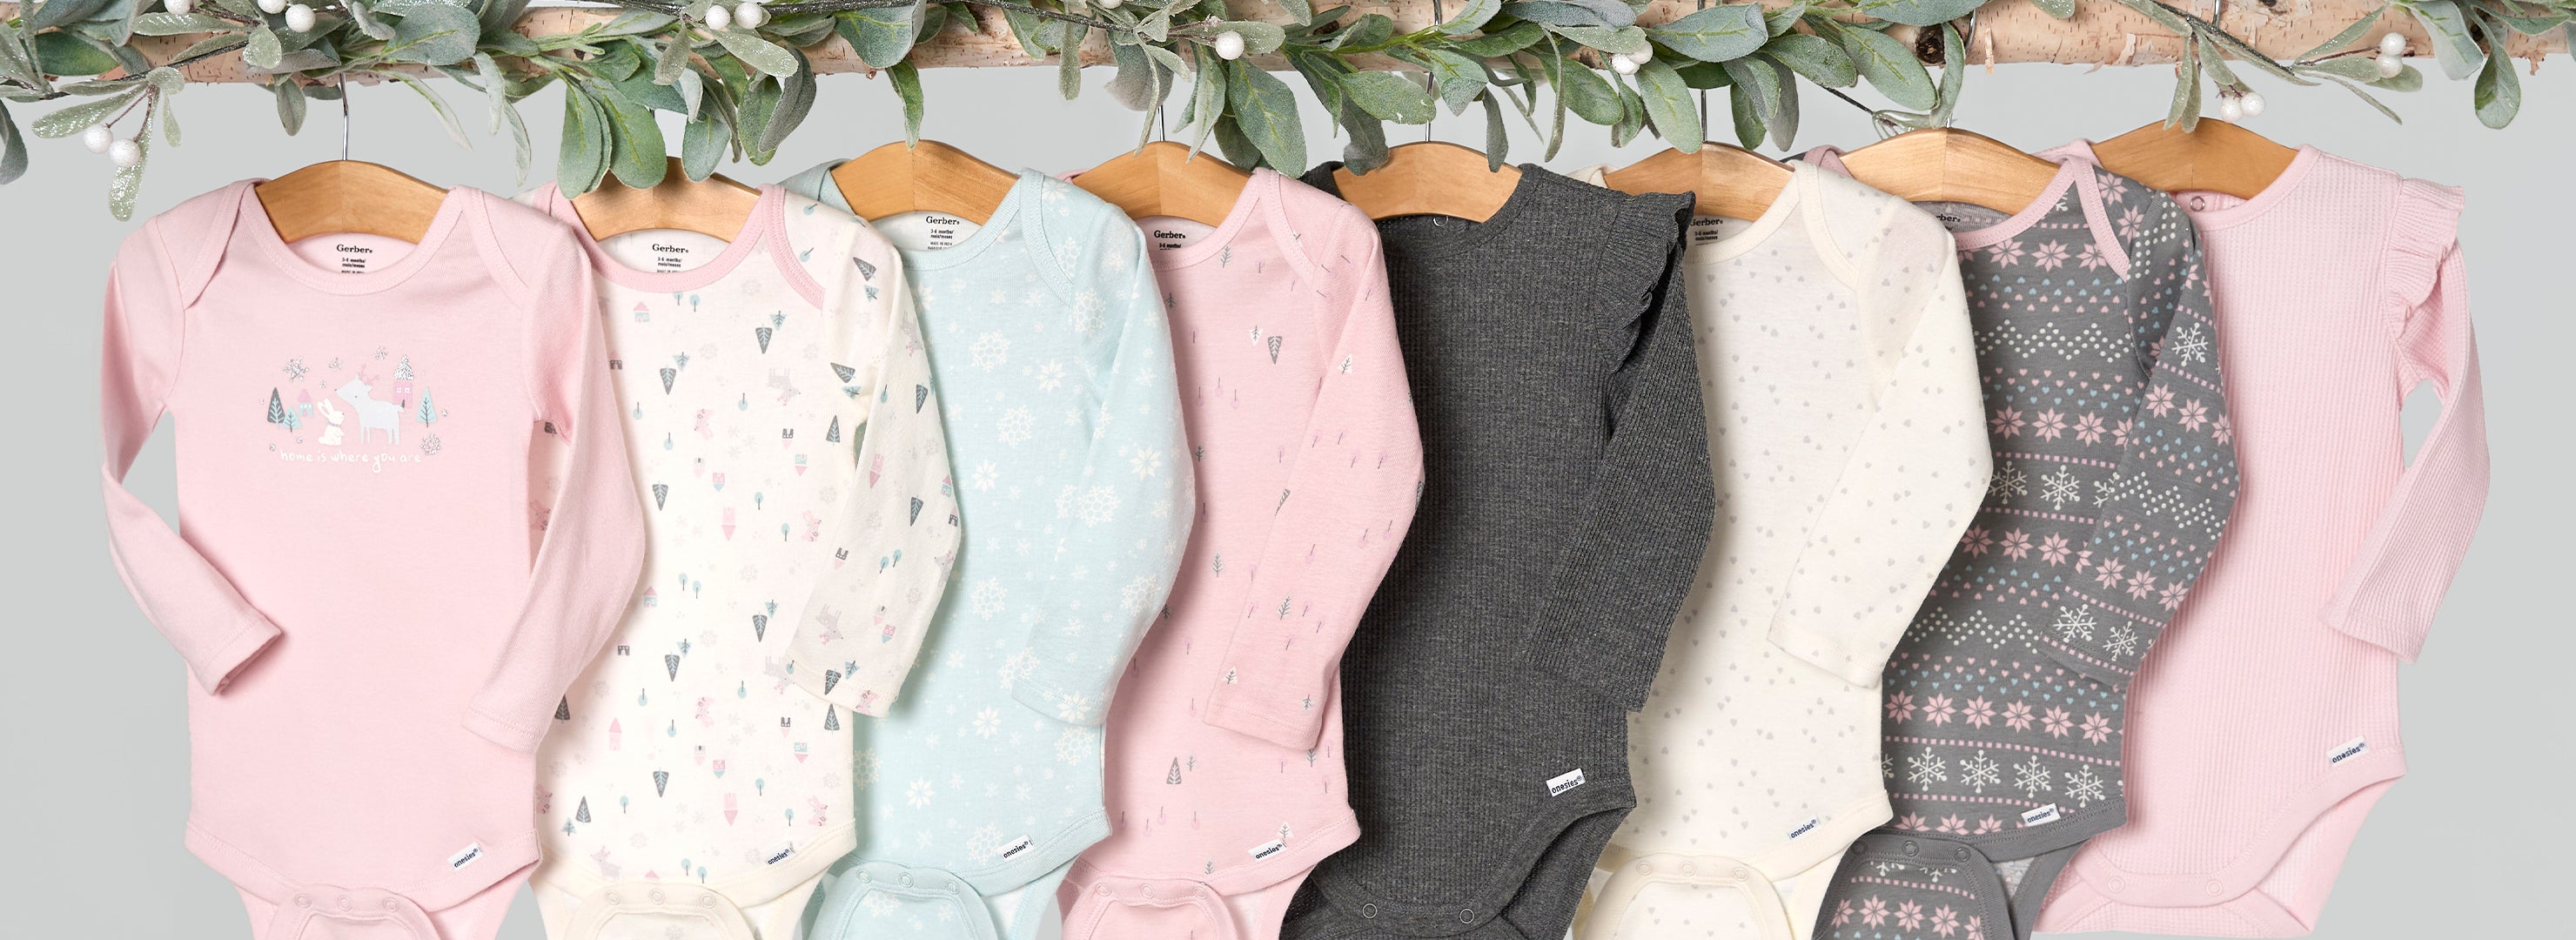 A whimsical sight: adorable winter girls' baby clothes hanging on a tree, creating a colorful display of tiny outfits in nature's wardrobe.